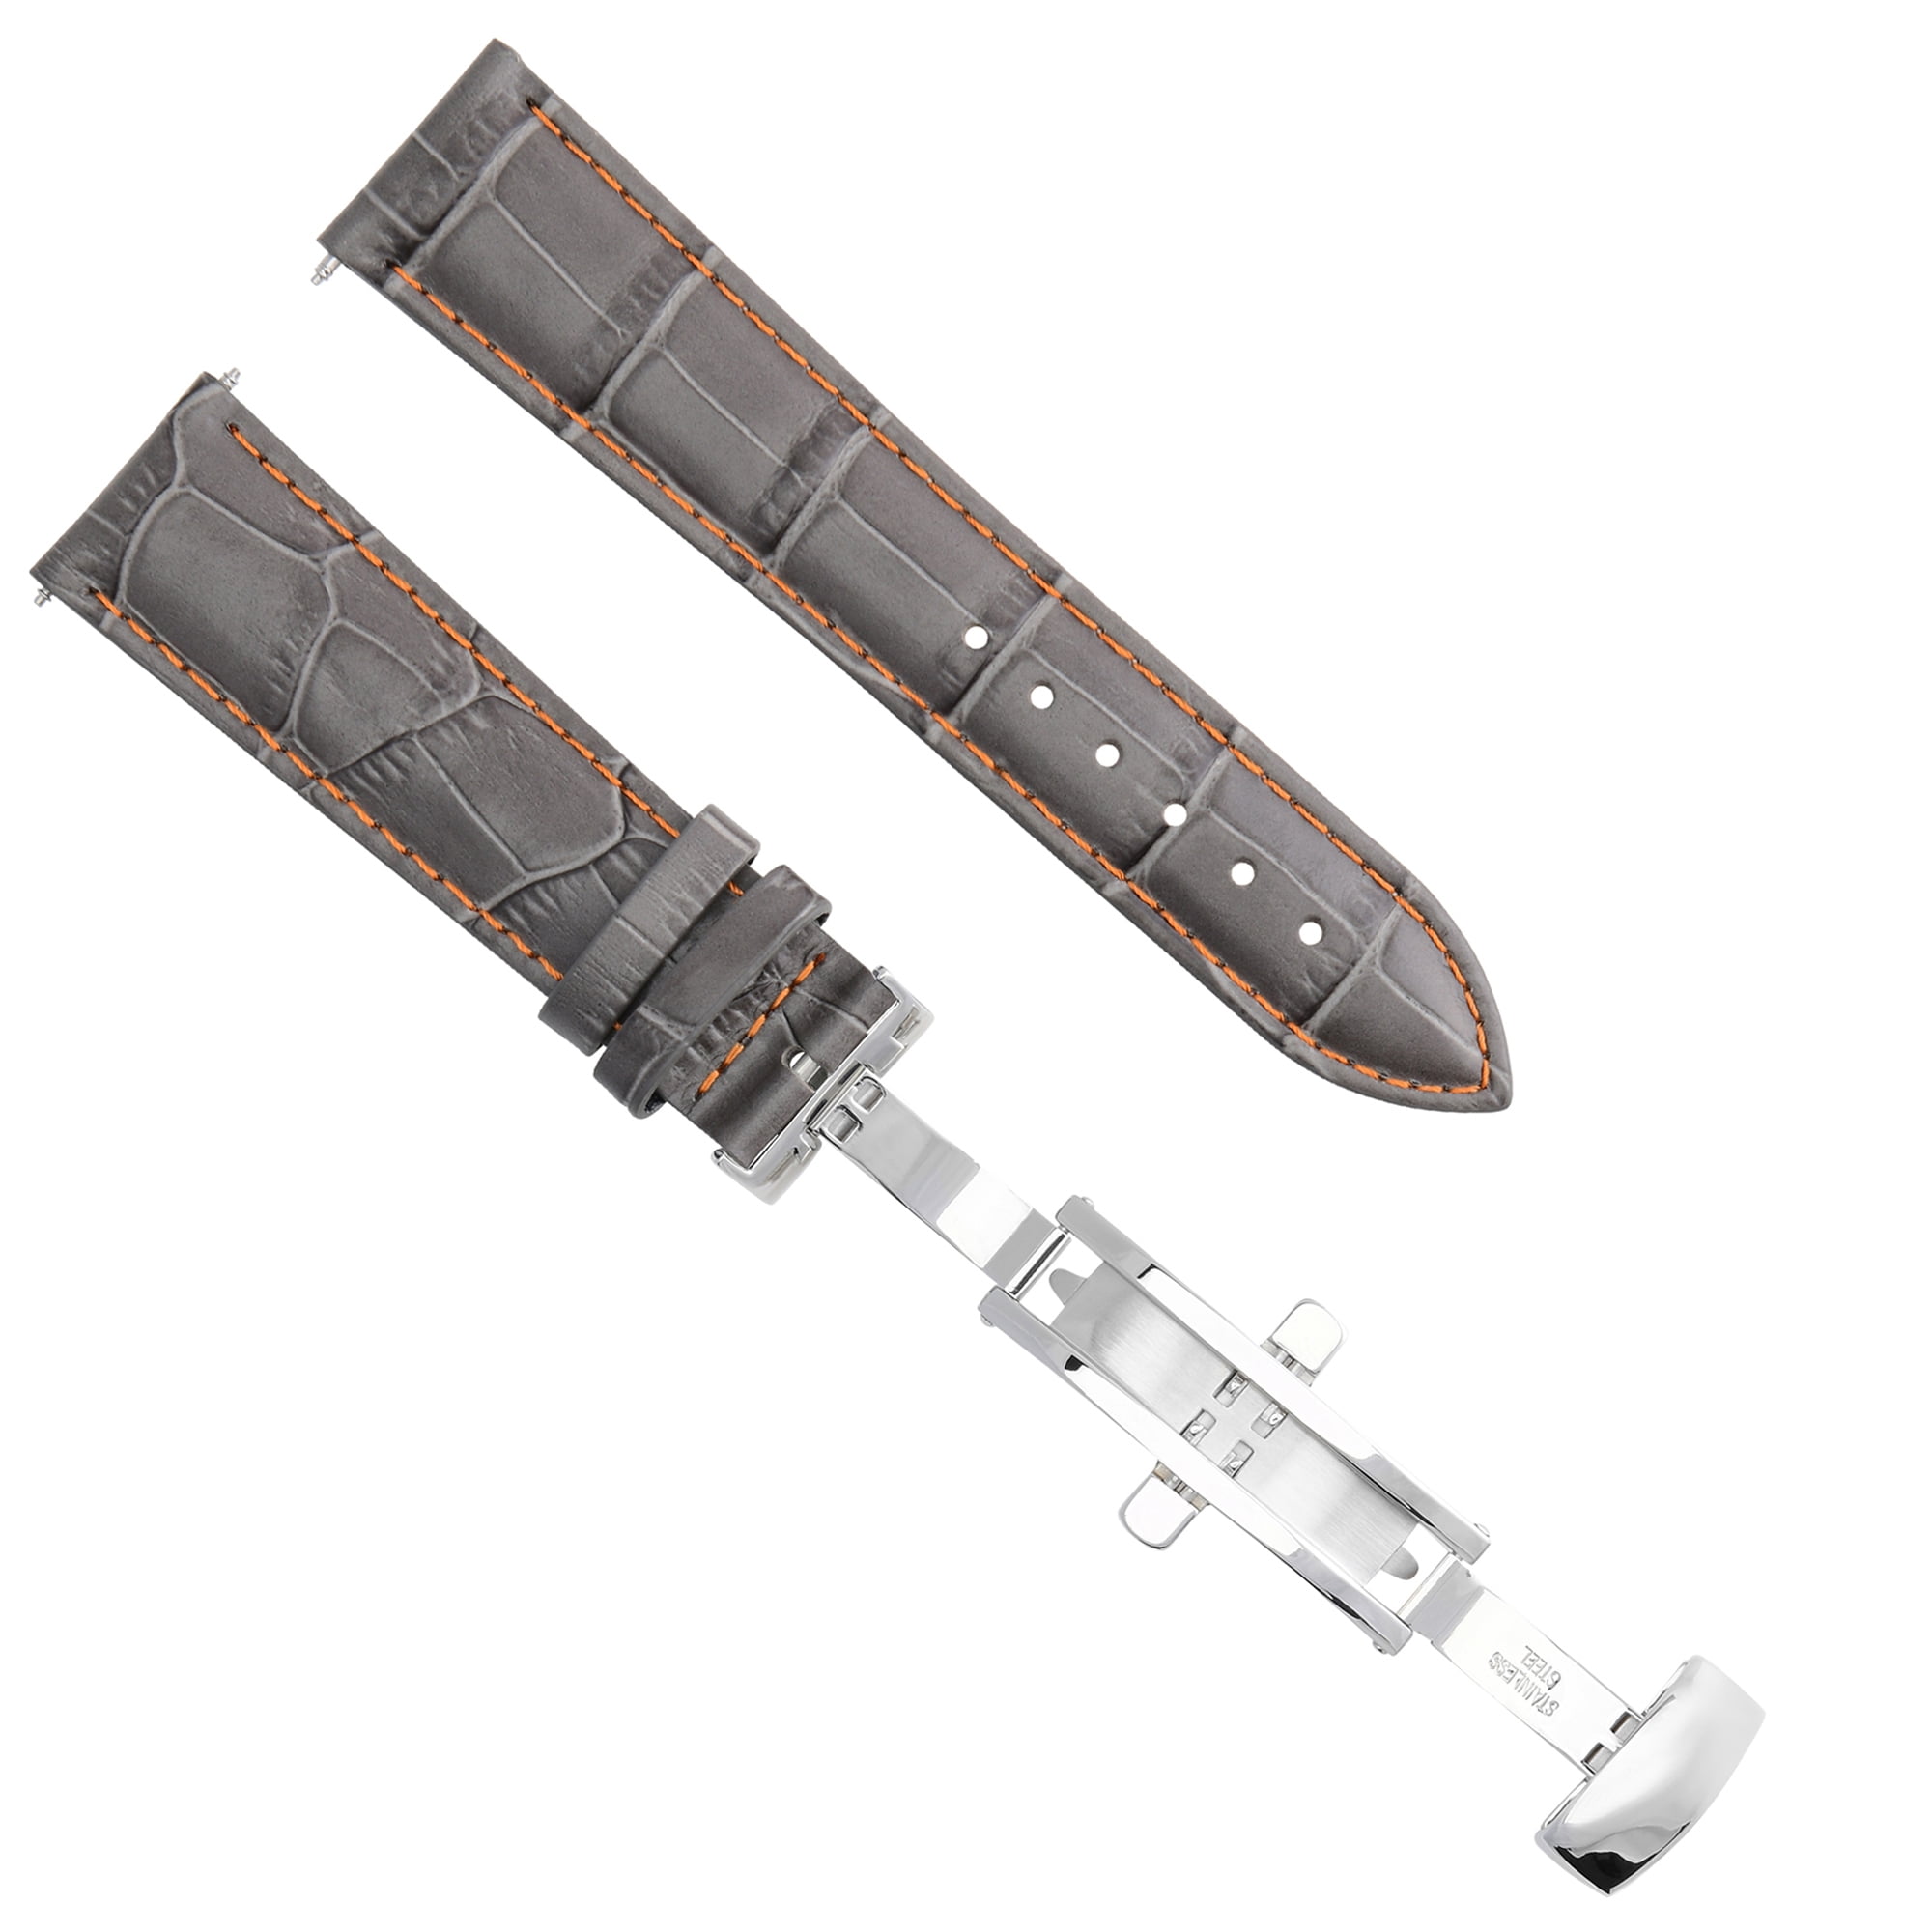 21MM LEATHER WATCH BAND FOR LONGINES MASTER COLLECTION WATCH GREY ORANGE S - Walmart.com